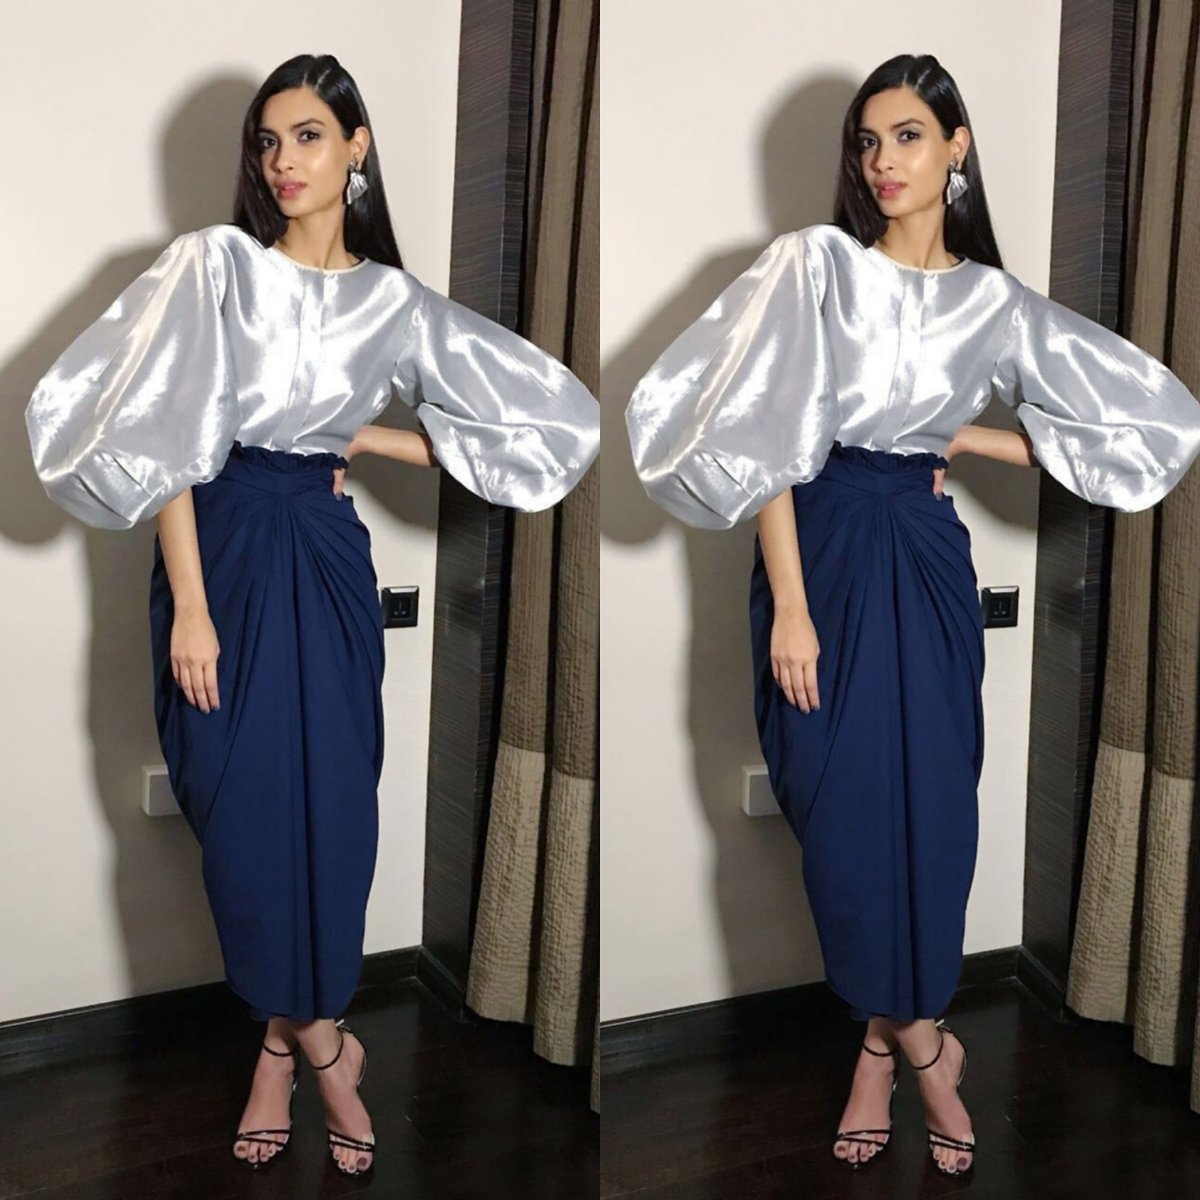 Diana Penty’s This Beautiful Look Giving Us A Serious Winter Party Fashion Goals